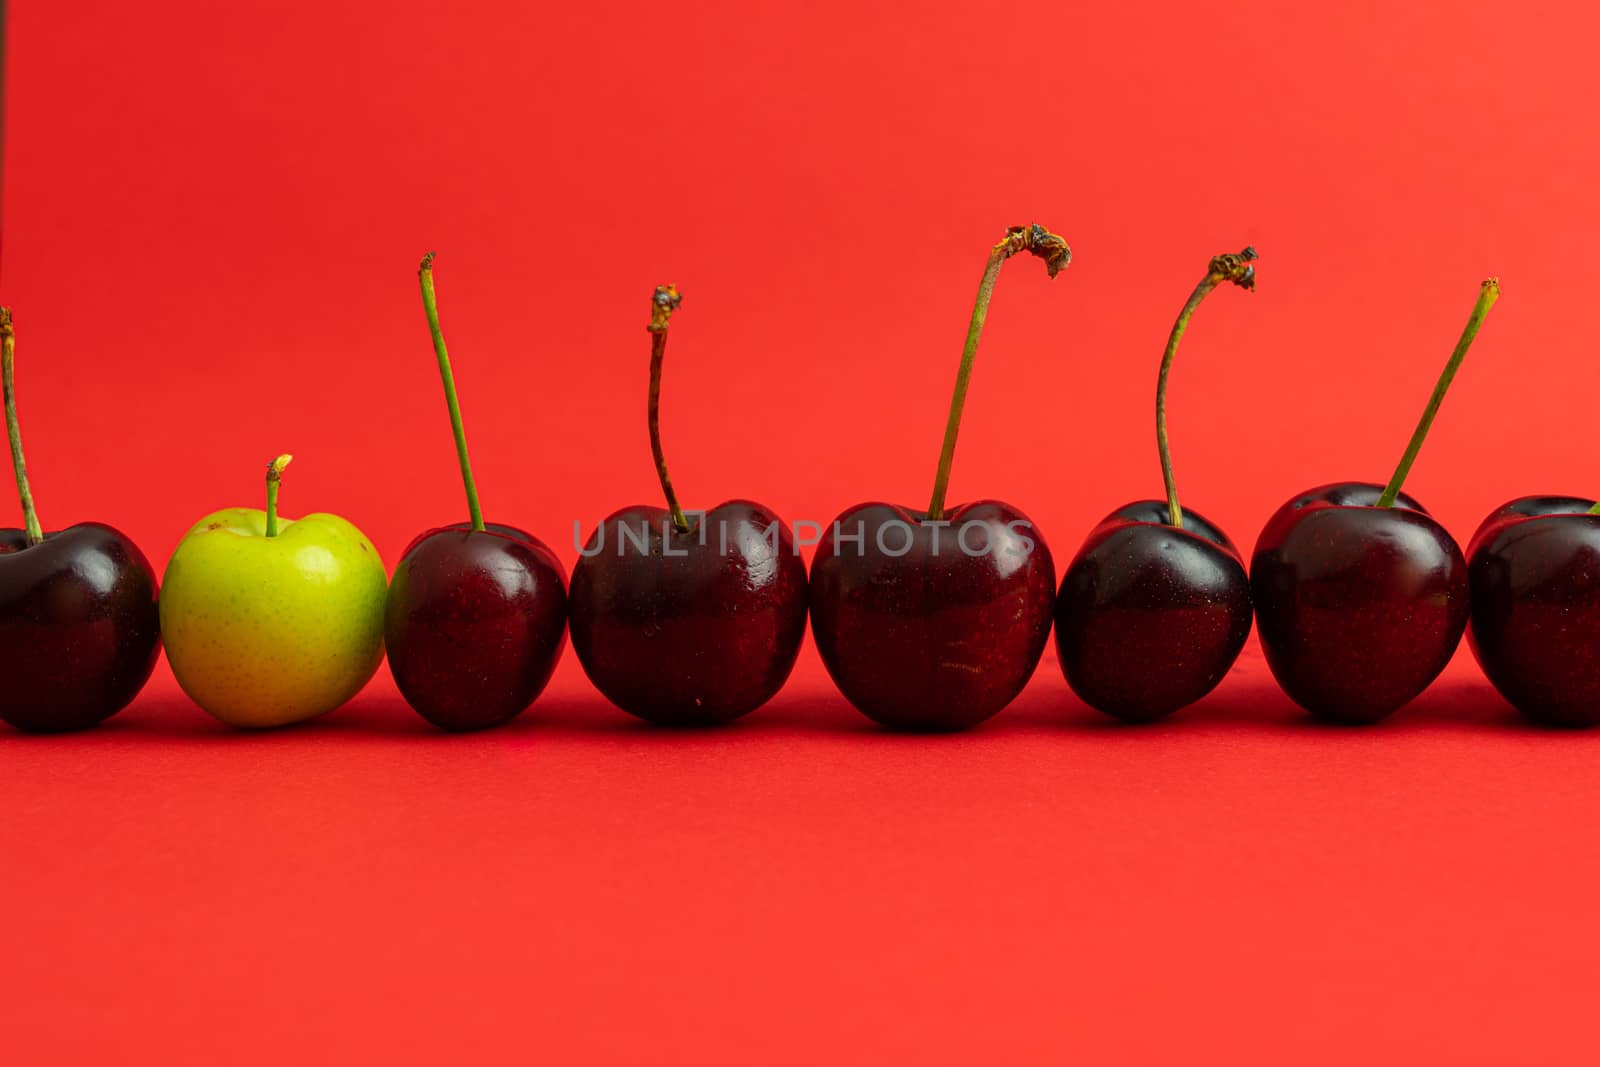 Line of cherries with a green plum to the left breaking the pattern on a deep red background.